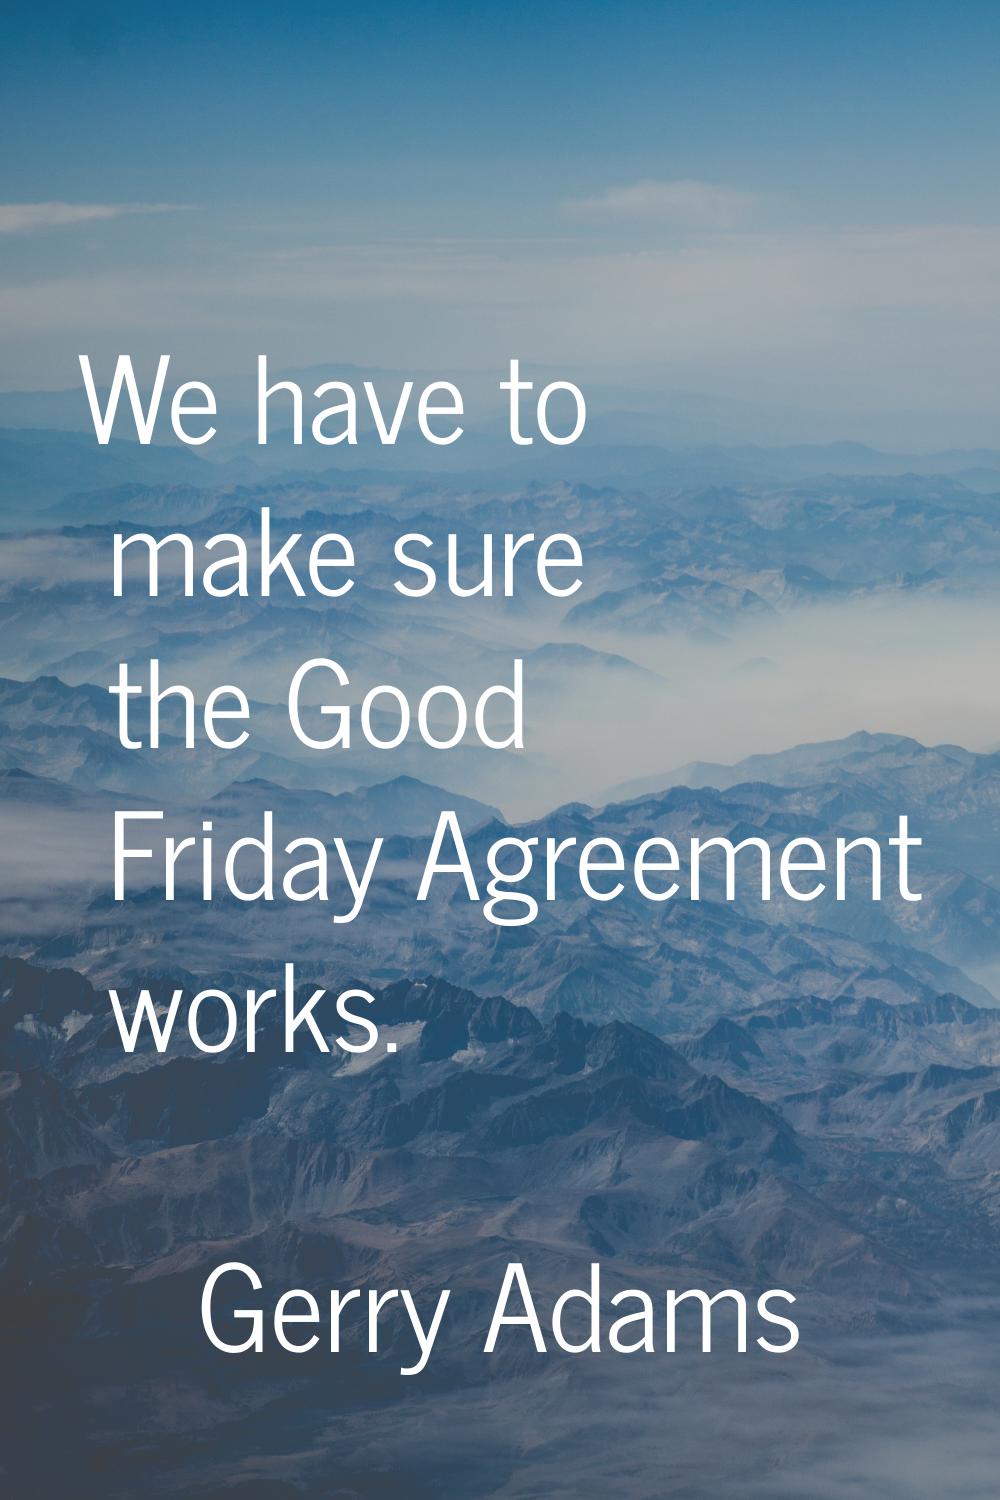 We have to make sure the Good Friday Agreement works.